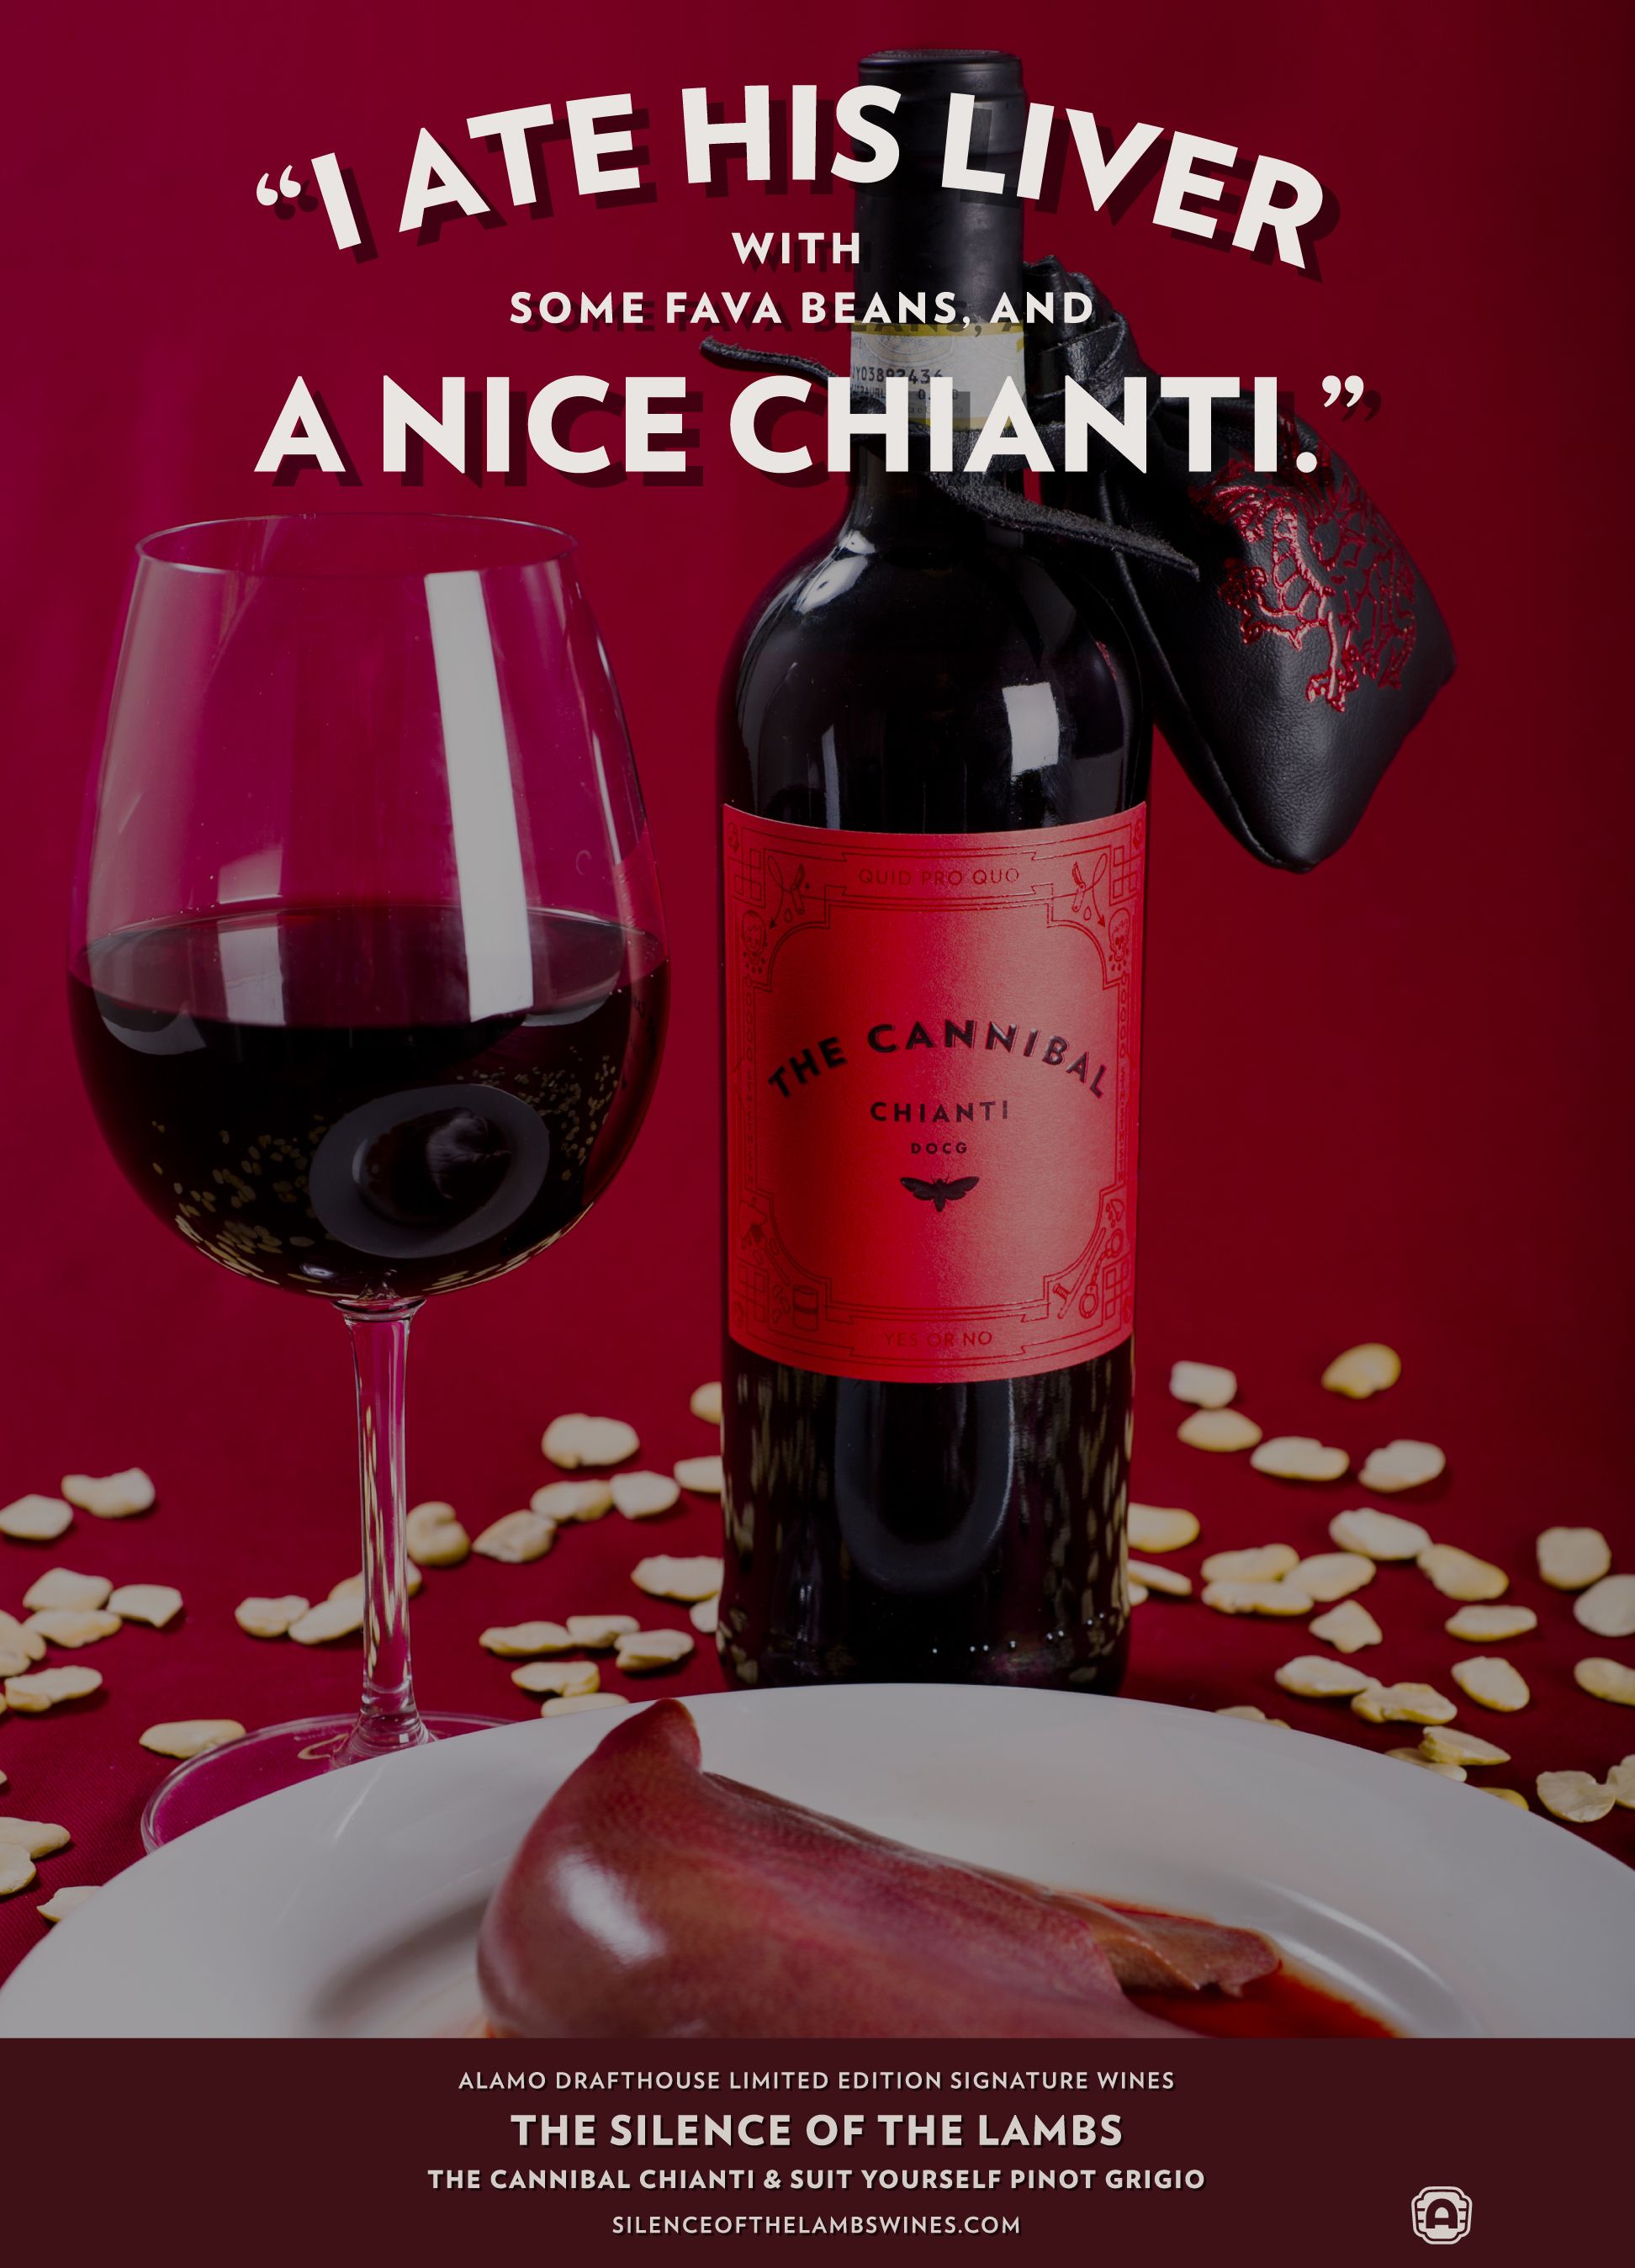 Silence of the Lambs Wine Ad